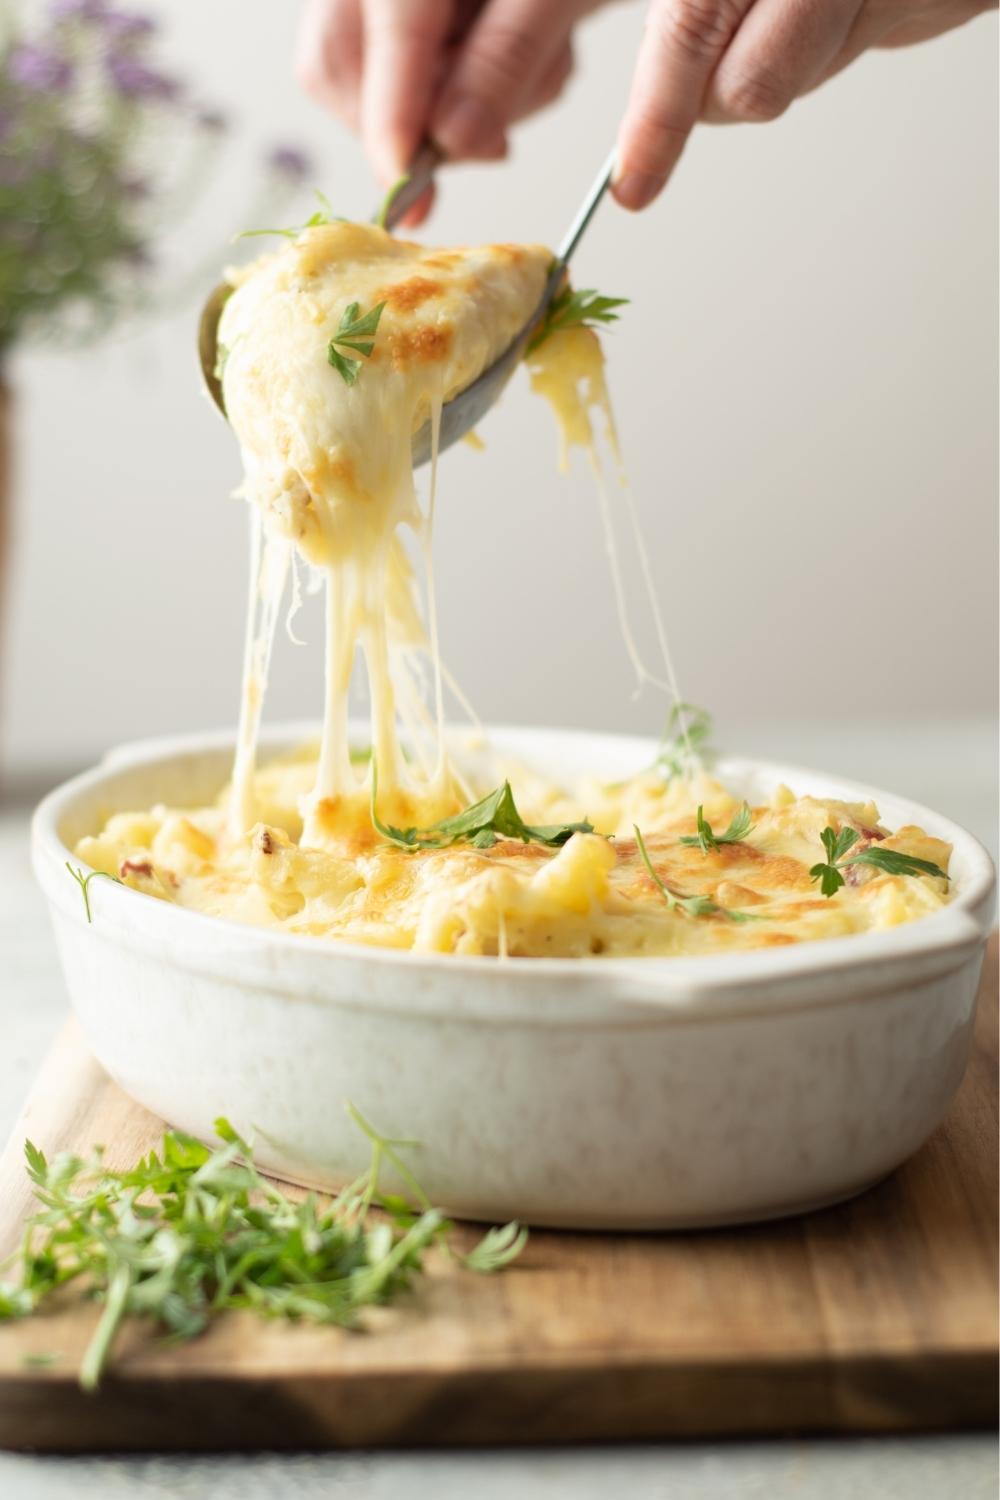 Two spoons scooping twice baked mashed potatoes from a casserole dish filled with the potatoes.